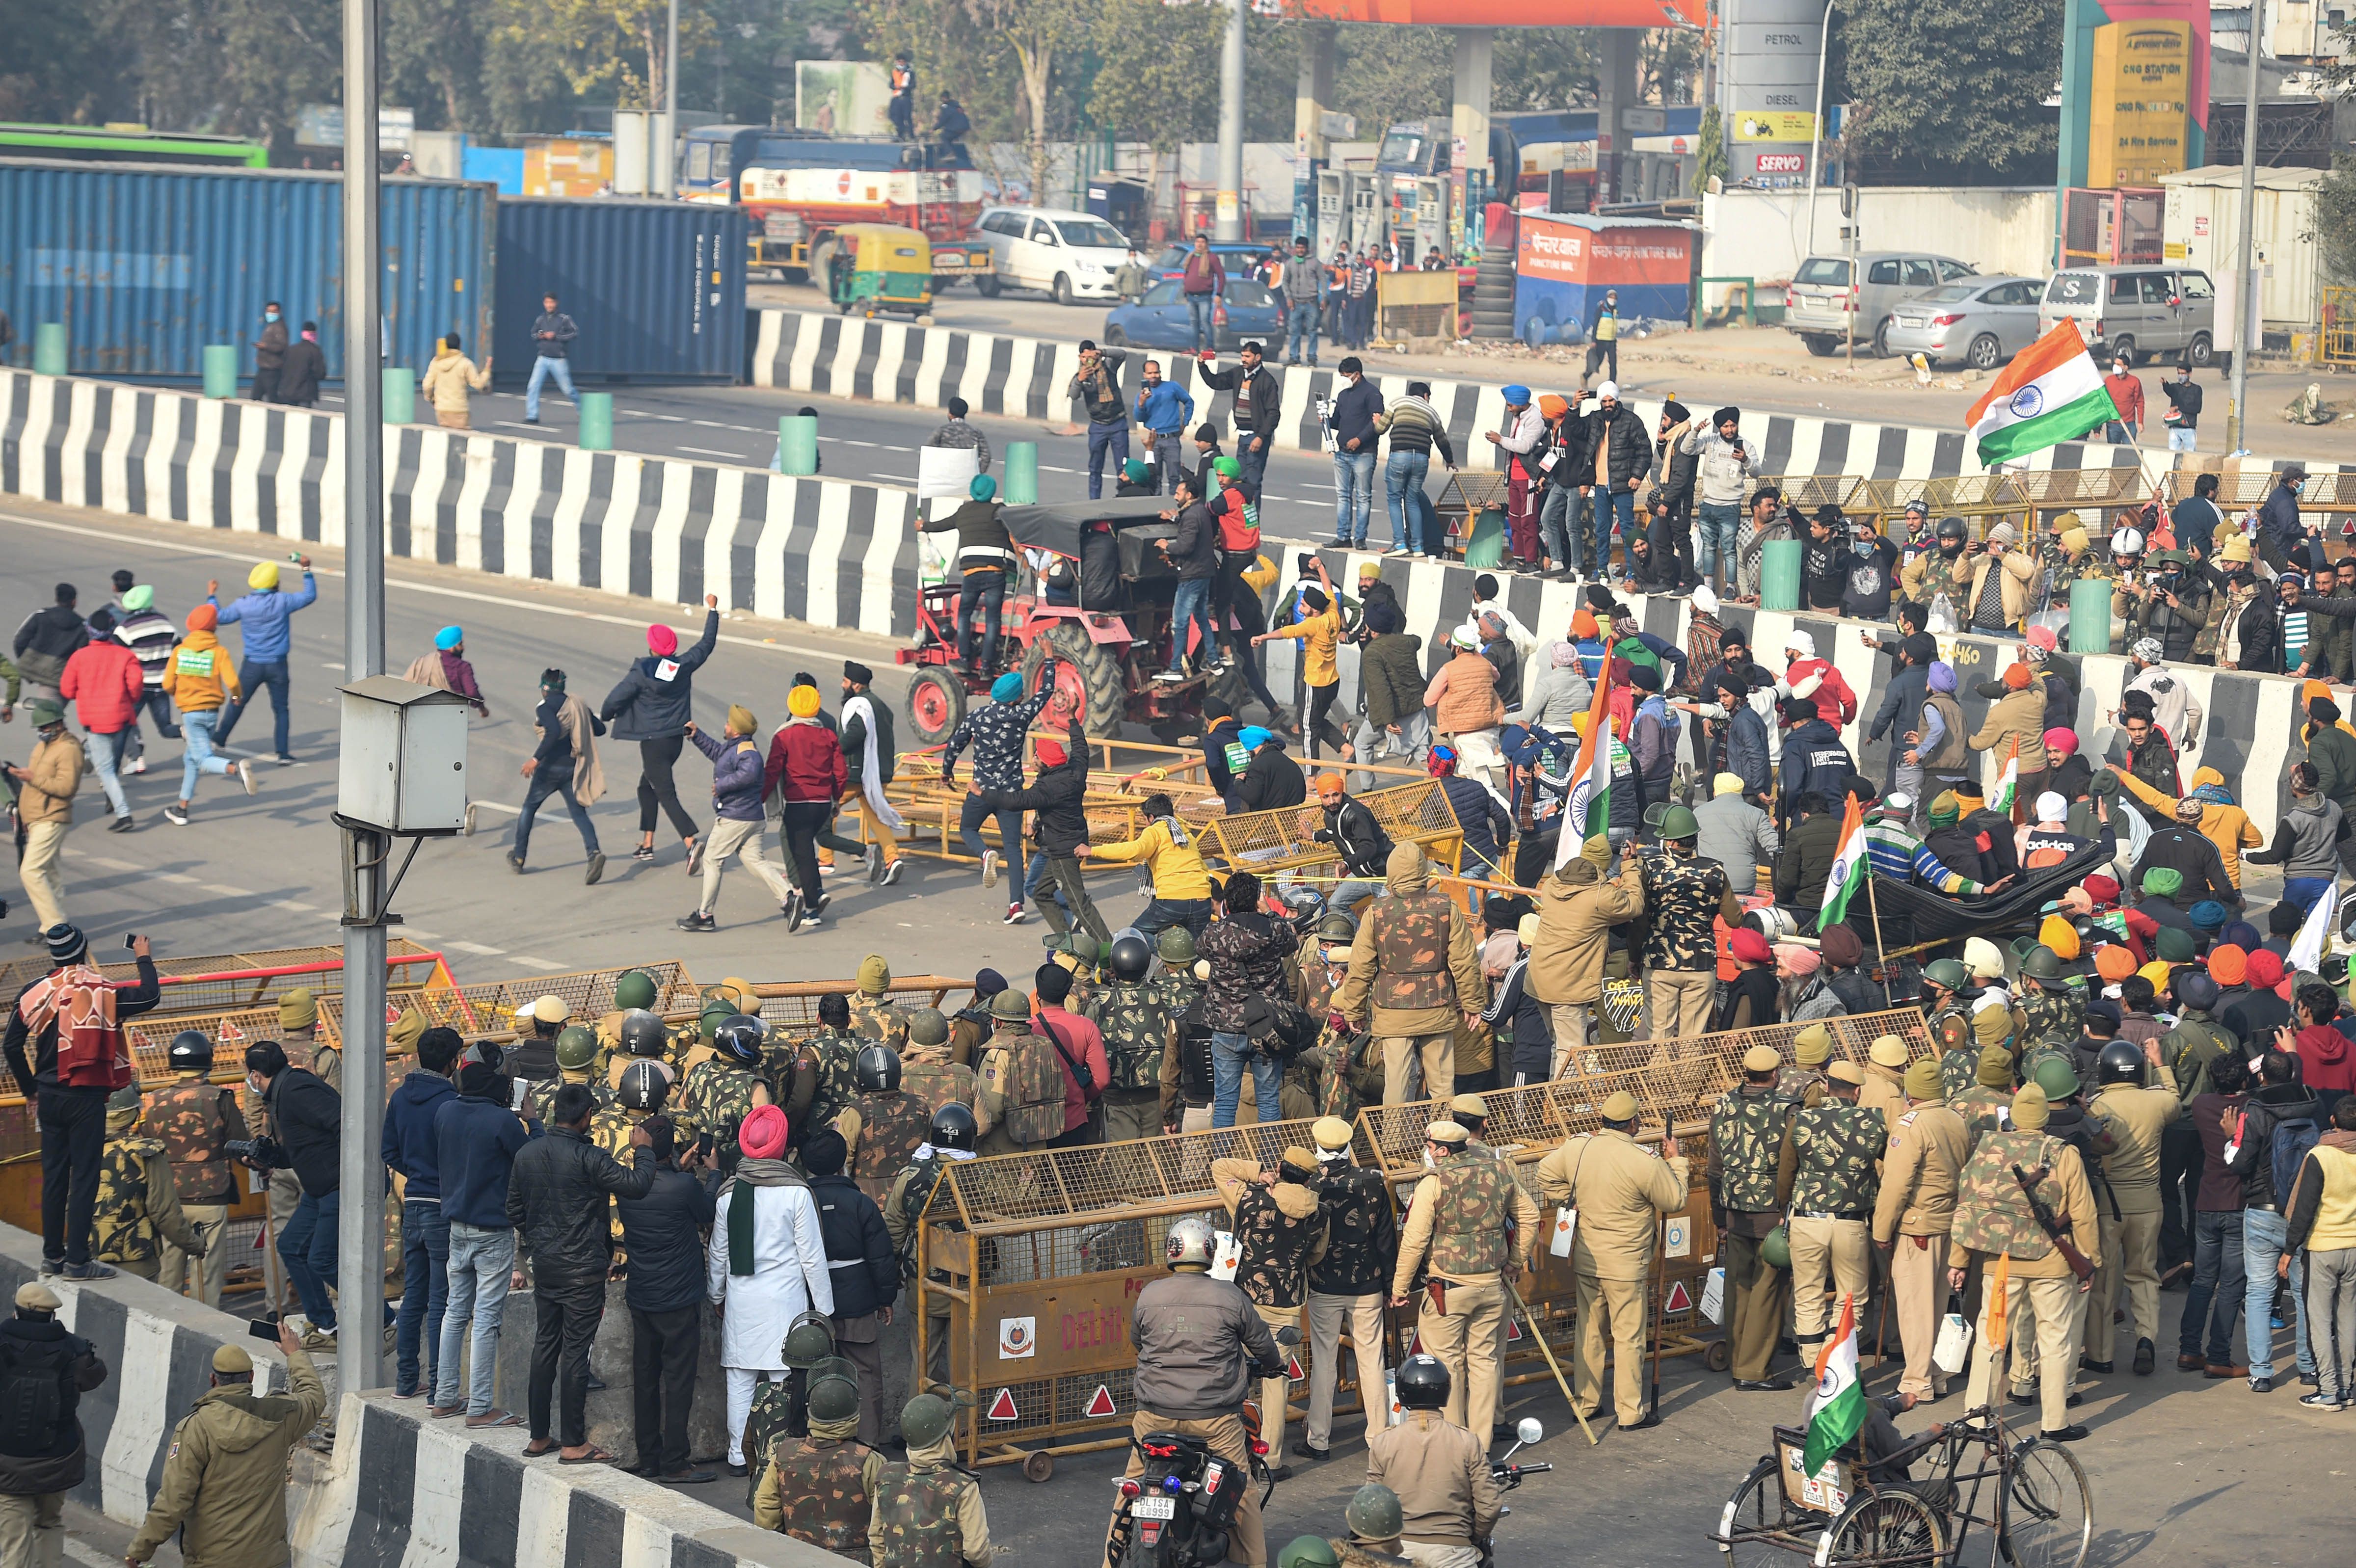 Farmers break the police barricades at the Ghazipur border as move towards Akshardham during their tractor rally on Republic Day in New Delhi, Tuesday, Jan. 26, 2021. (PTI Photo)